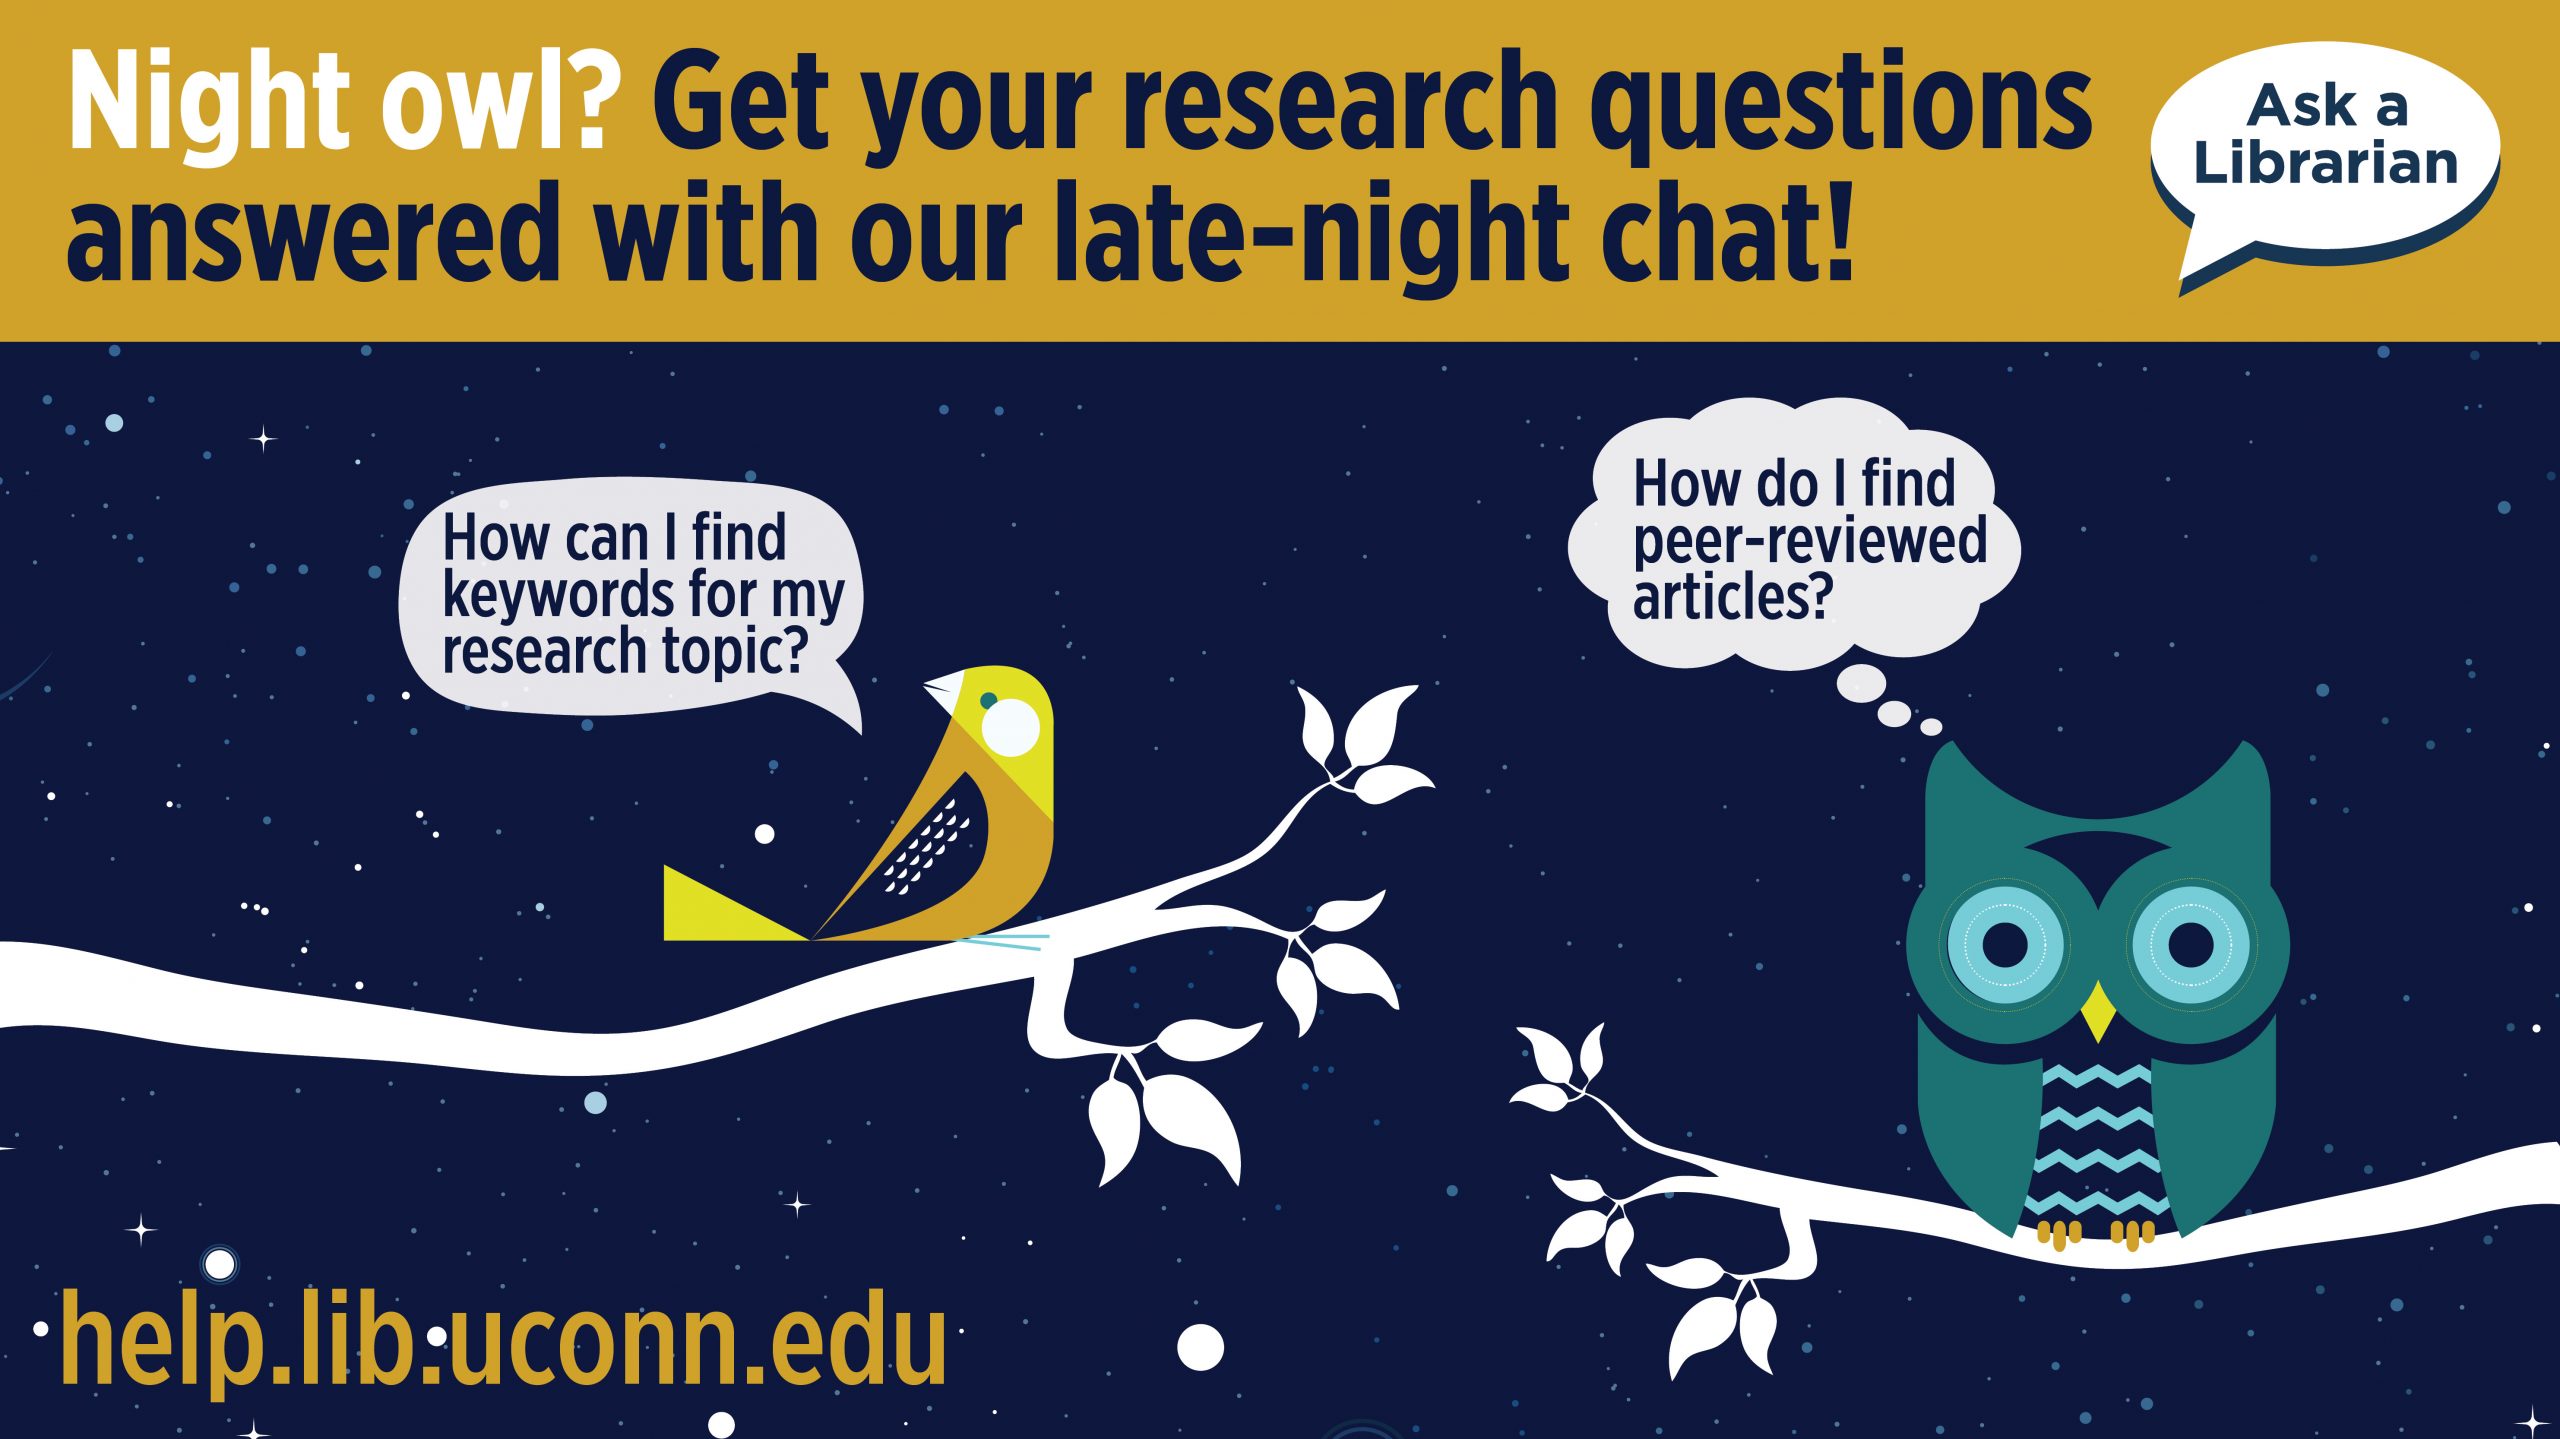 Illustration with a bird and an owl on branches at night with thought balloons with the questions: How can I find keywords for my research topic? How do I find peer-reviewed articles? Night owl? Get your research questions answered with our late-night chat! Ask A Librarian. help.lib.uconn.edu